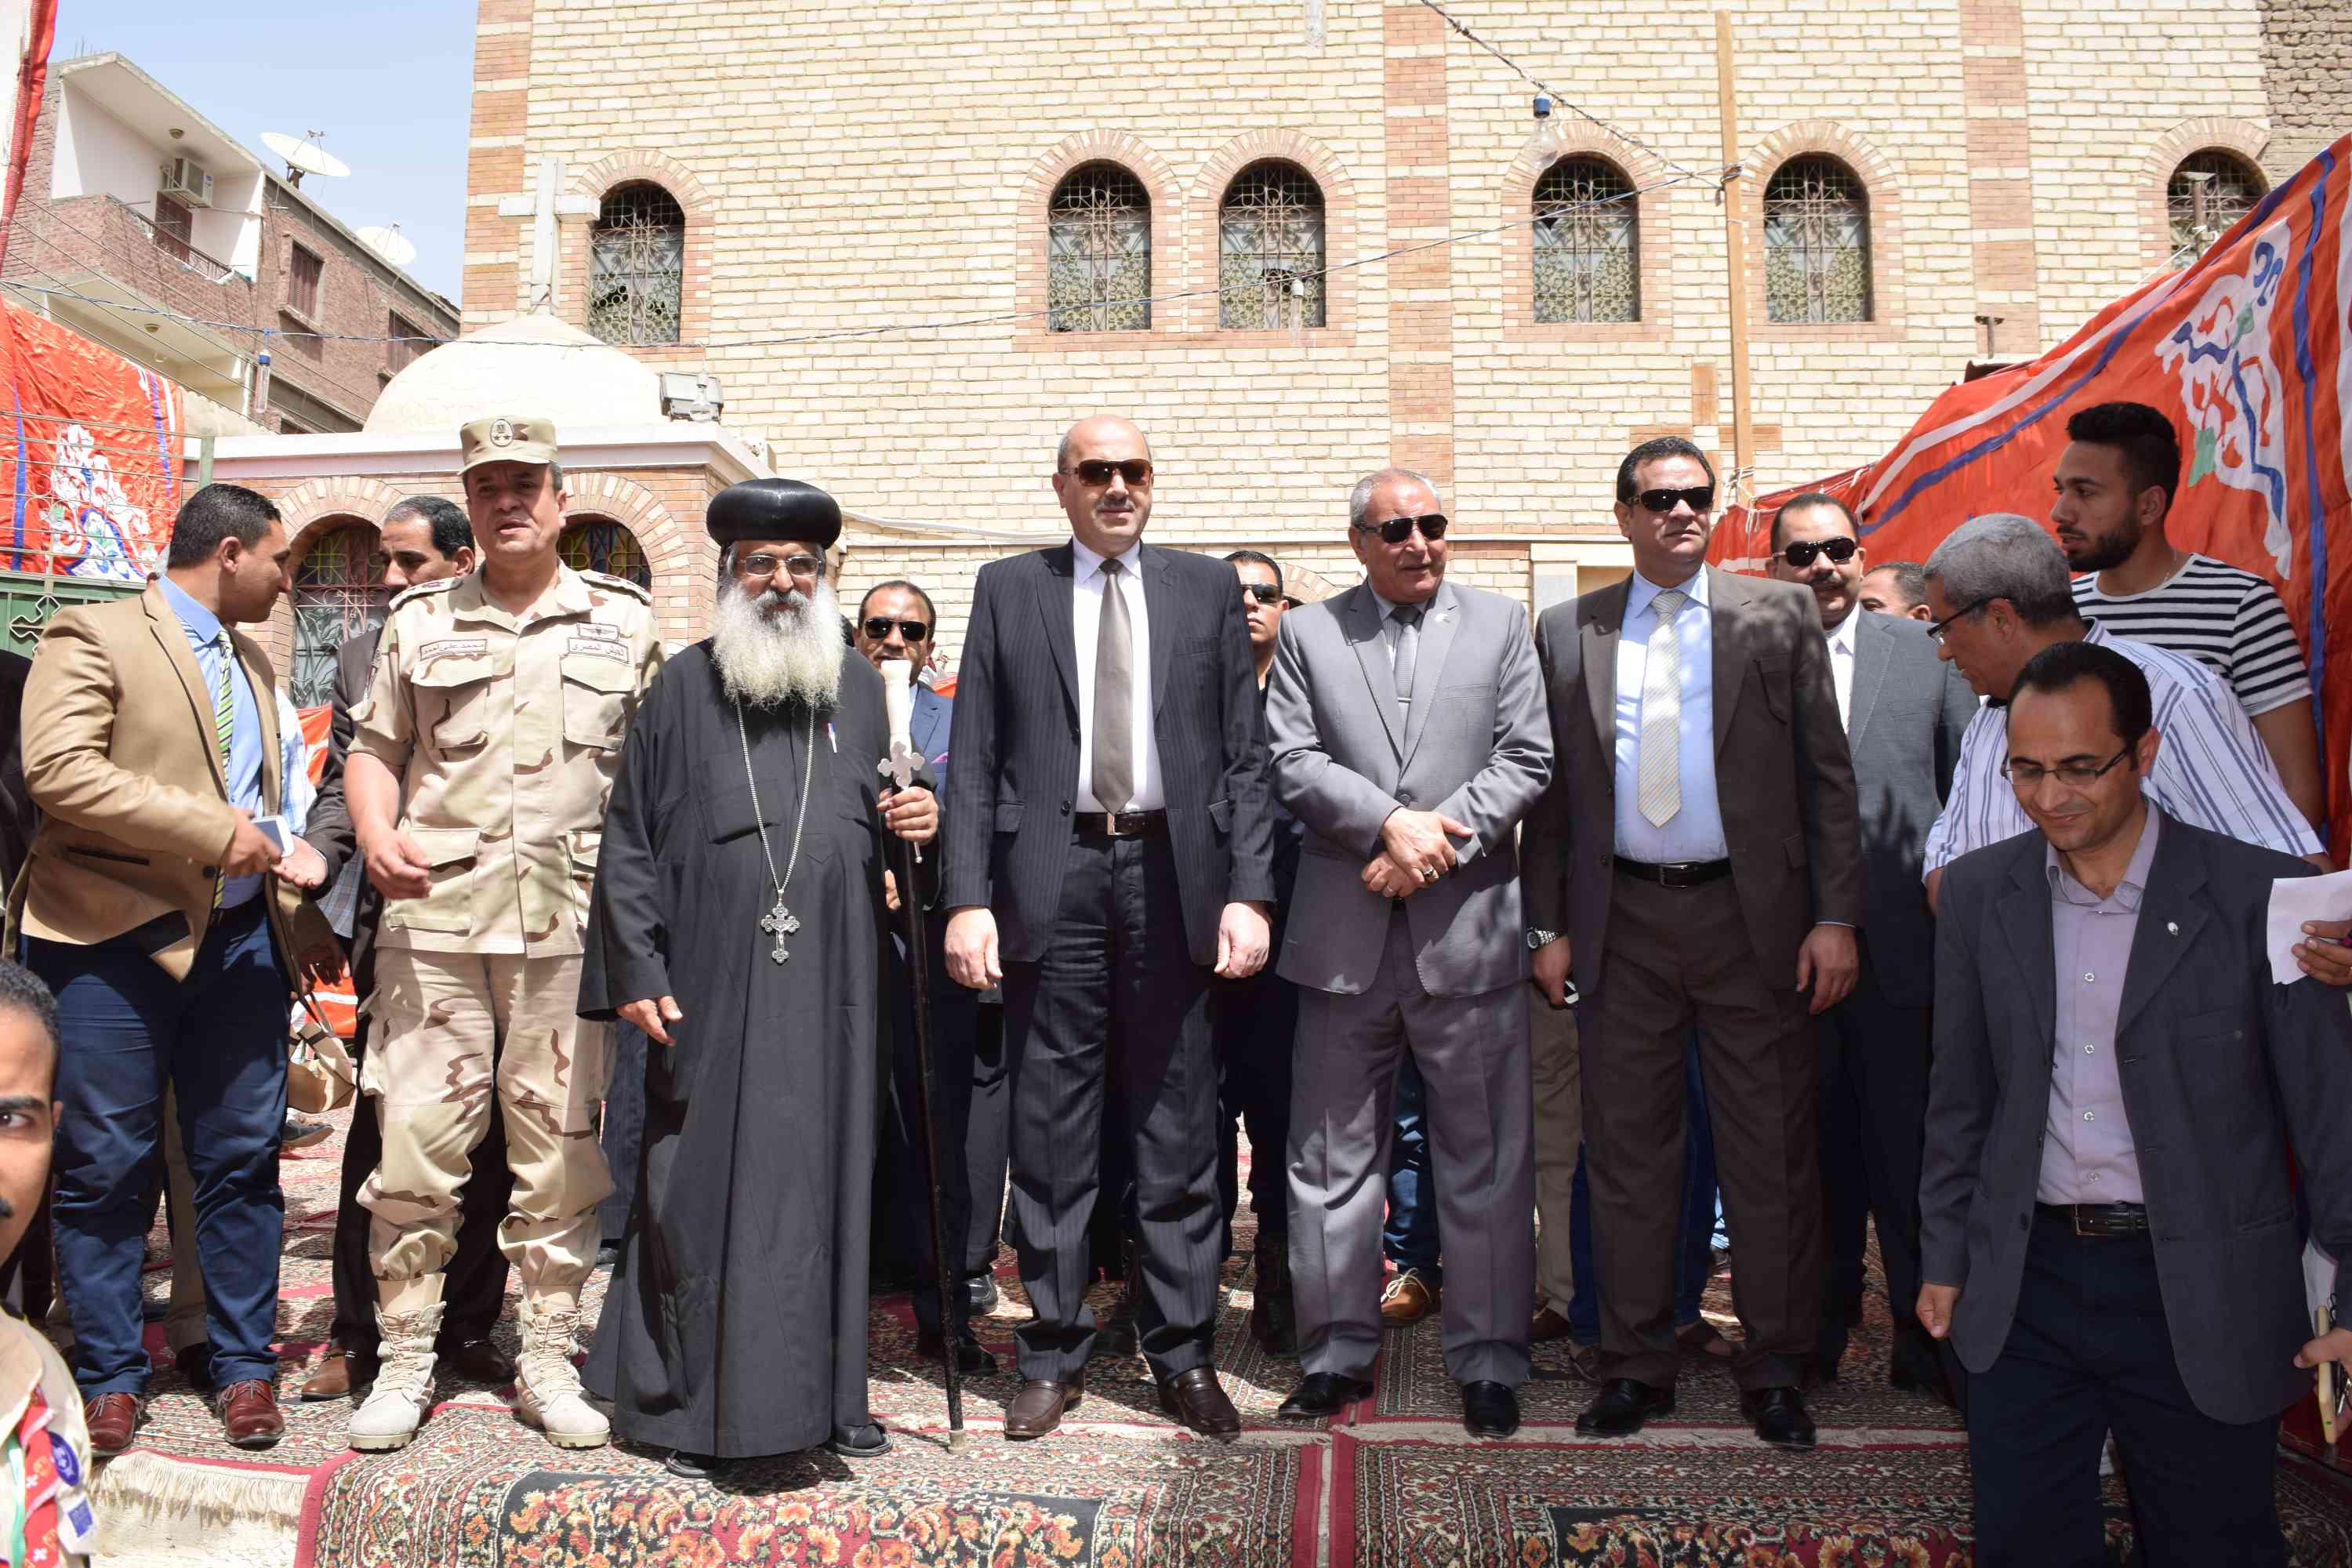 Governor of Minya visits several churches to congratulate Christians on Easter